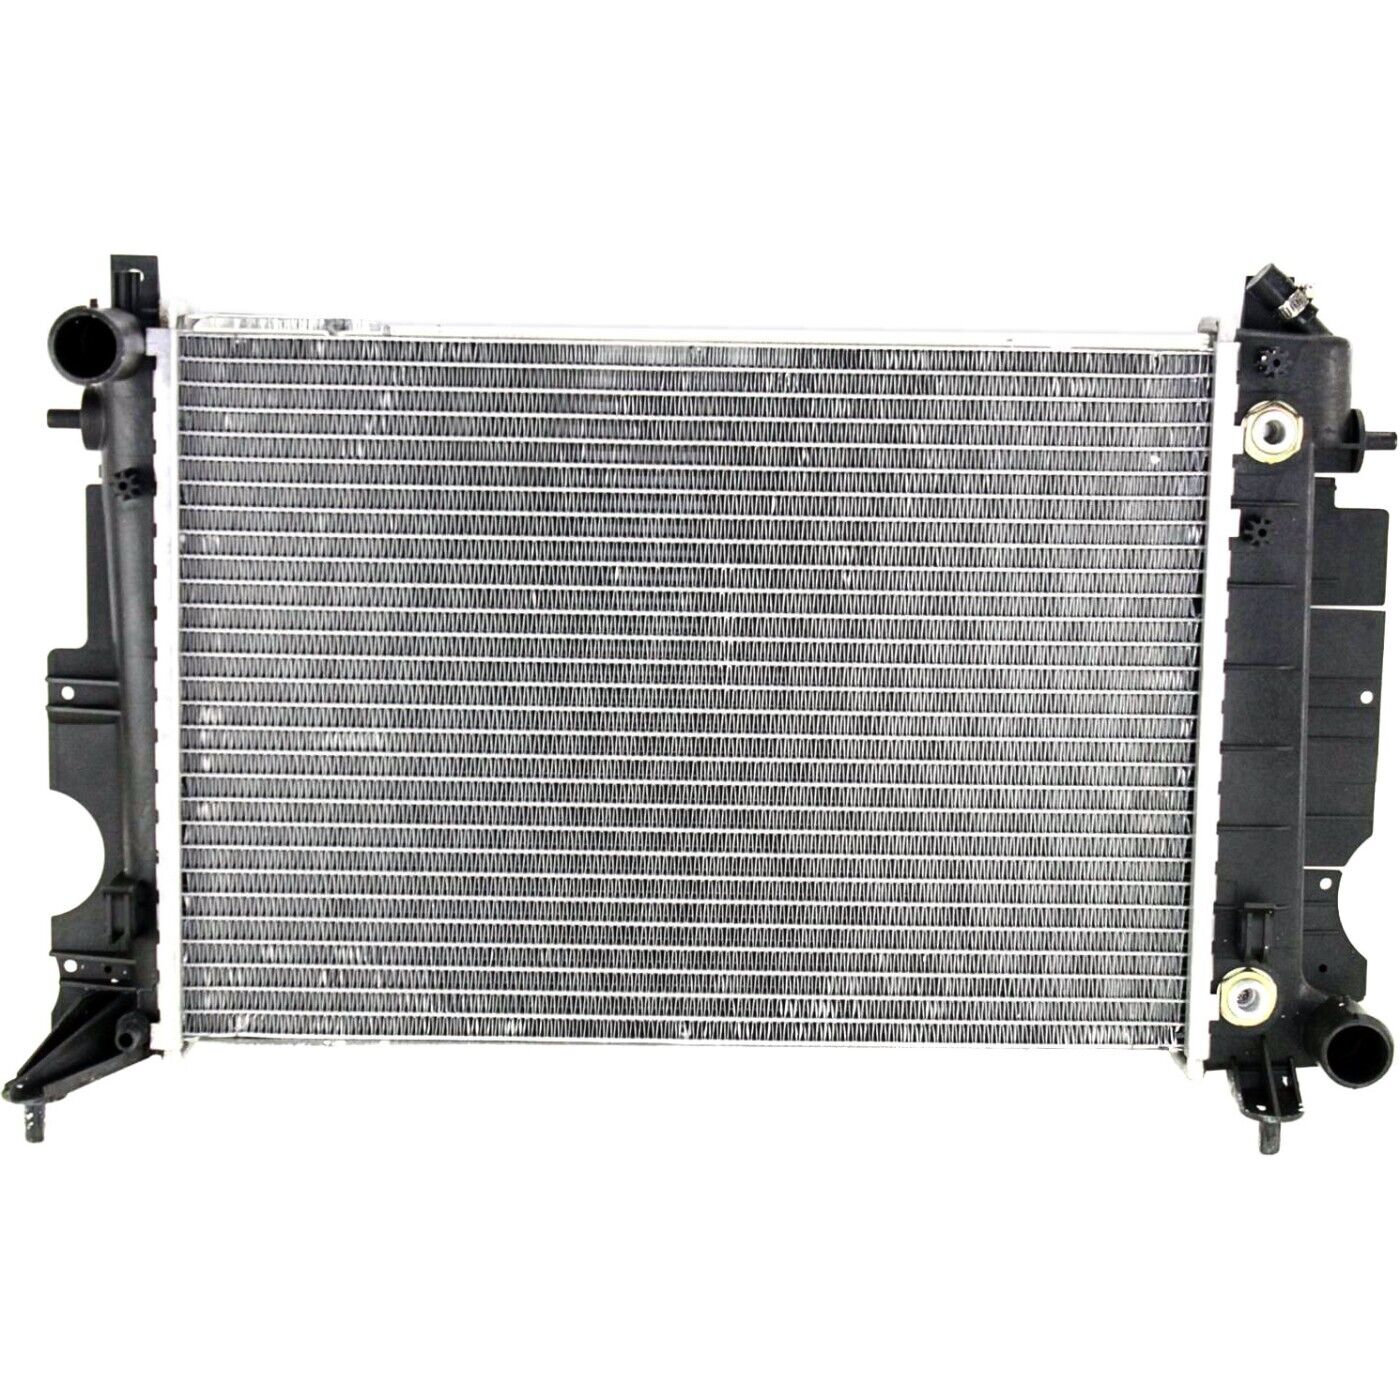 Aluminum Radiator For 1999-03 Saab 9-3 1991-98 900 1Row With Transmission Cooler